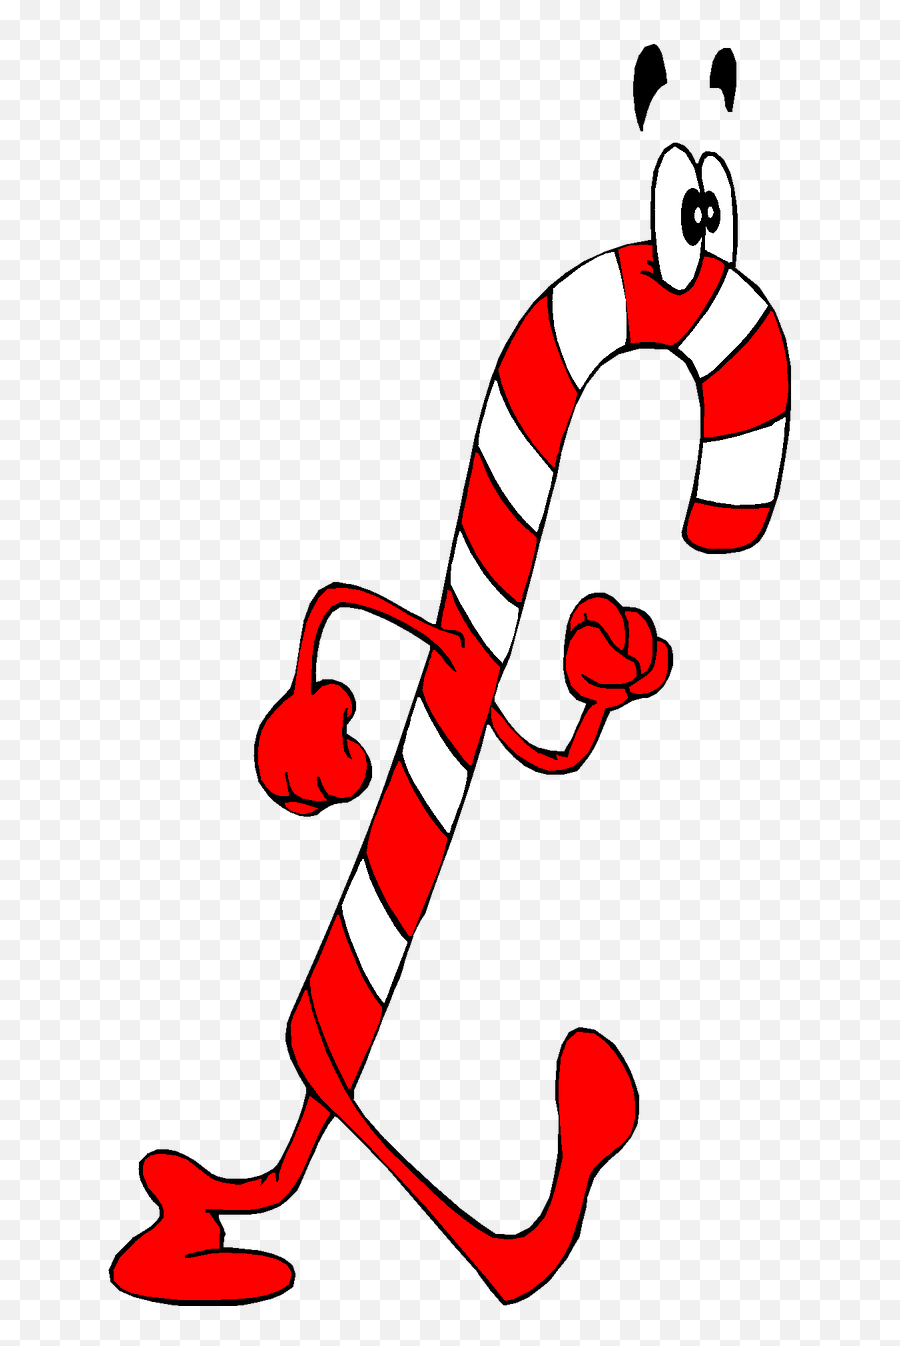 Christmas Holiday Clip Art Candy - Free Image On Pixabay Candy Cane Person Cartoon Emoji,Christmas Clip Art Emotions